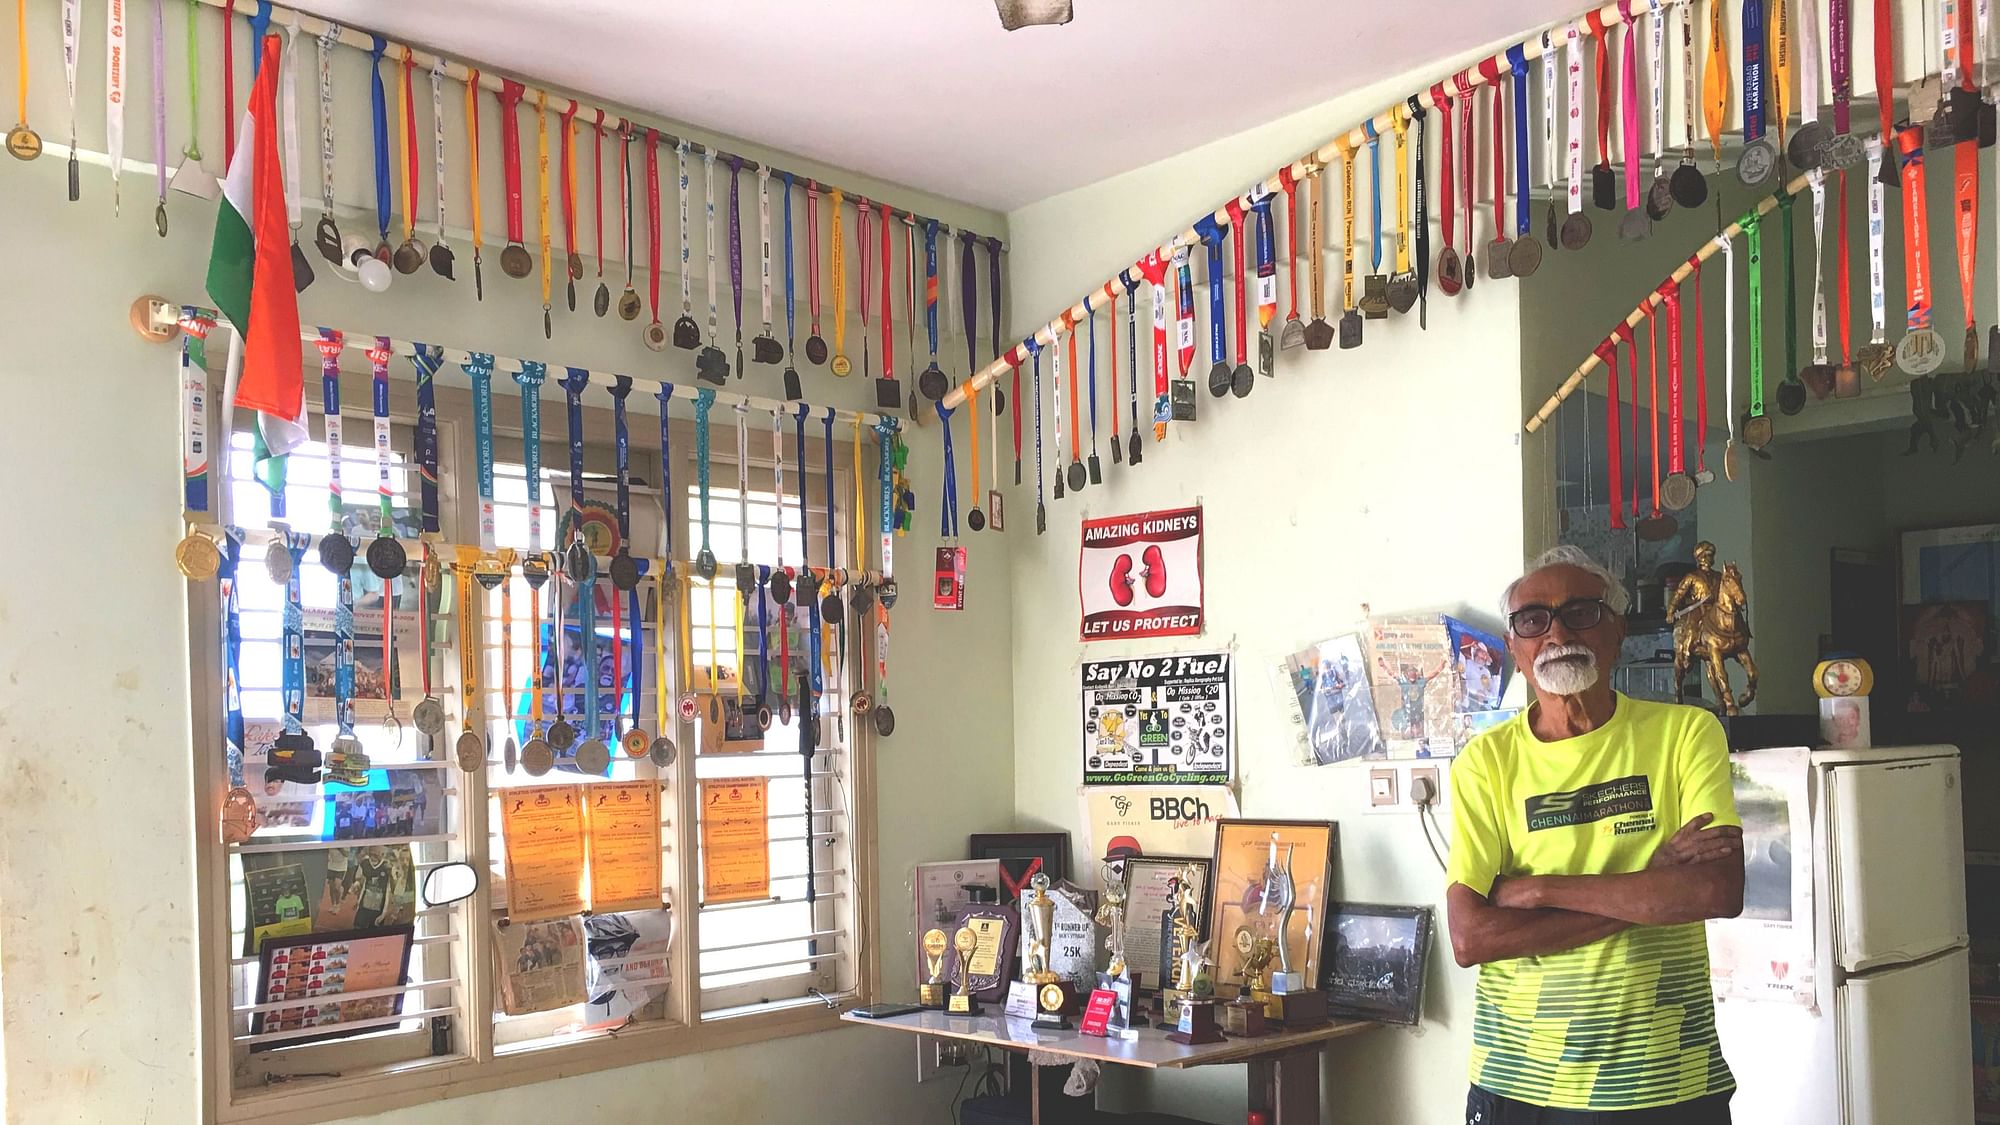 Bylahalli Raghunath Janardan, 86, is the oldest competitor in almost all of the marathon and cycling events he attends.&nbsp;